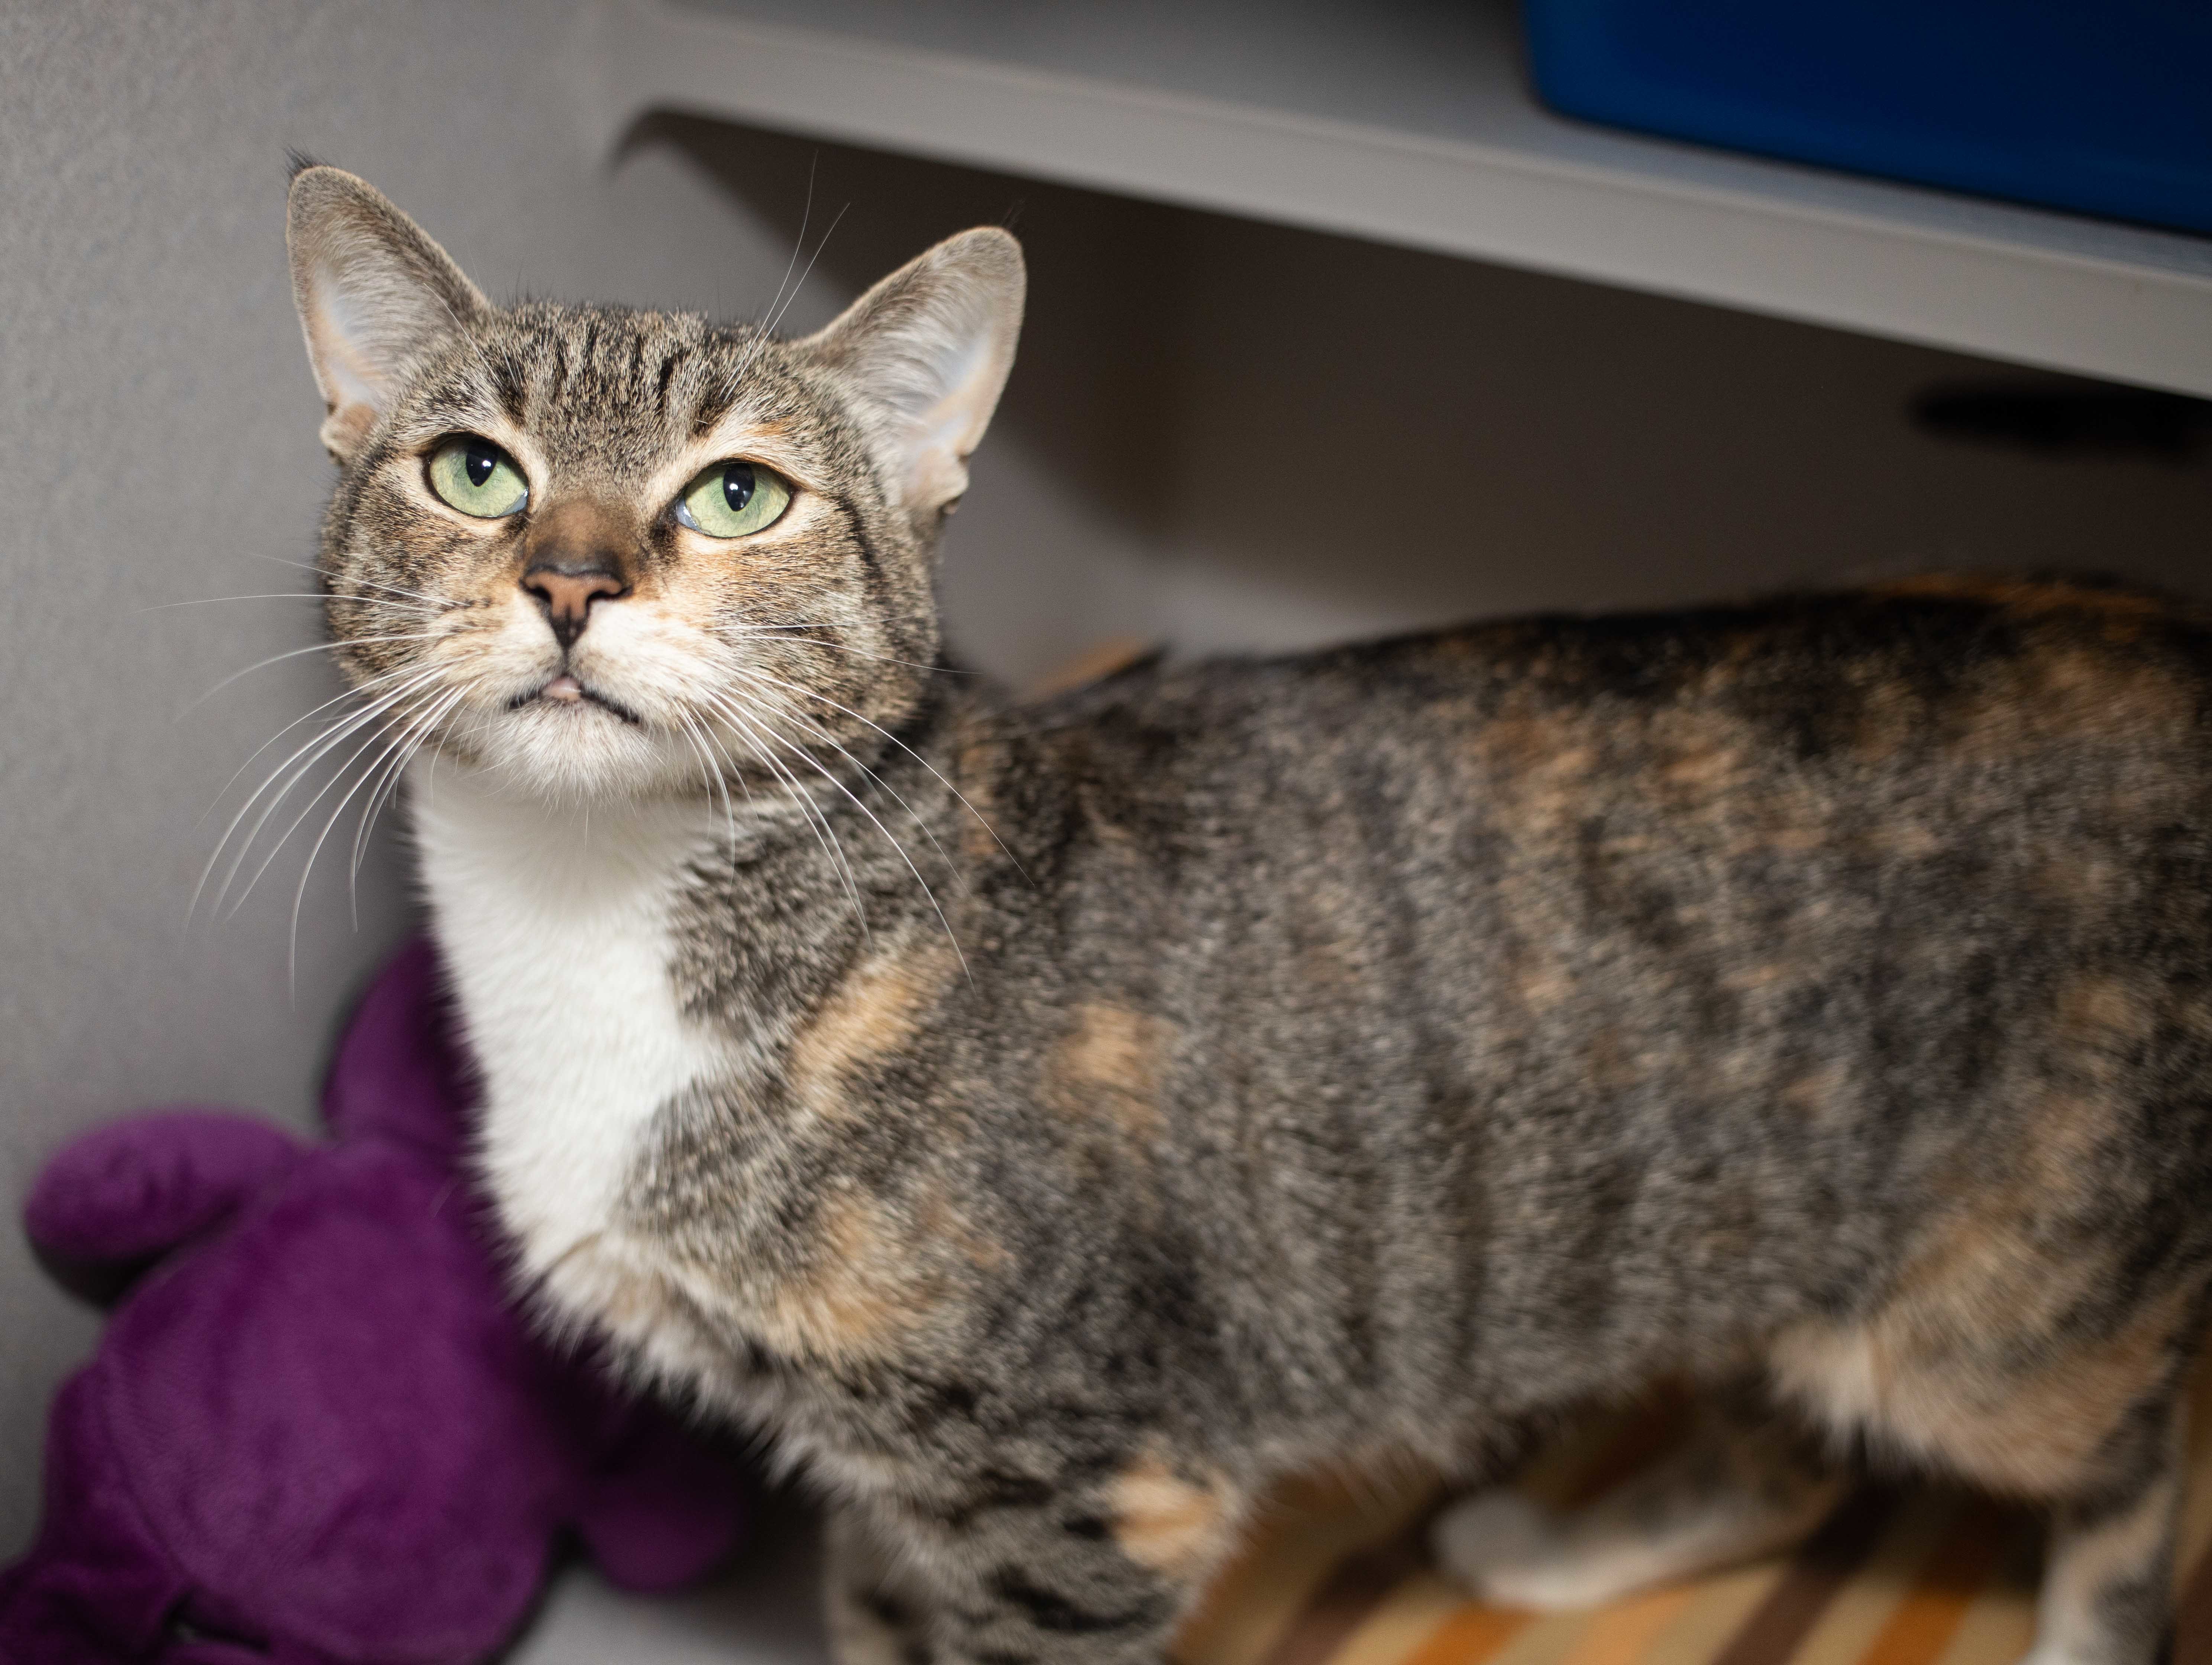 Cat for adoption - Shelby, a Calico & Tabby Mix in Los ...